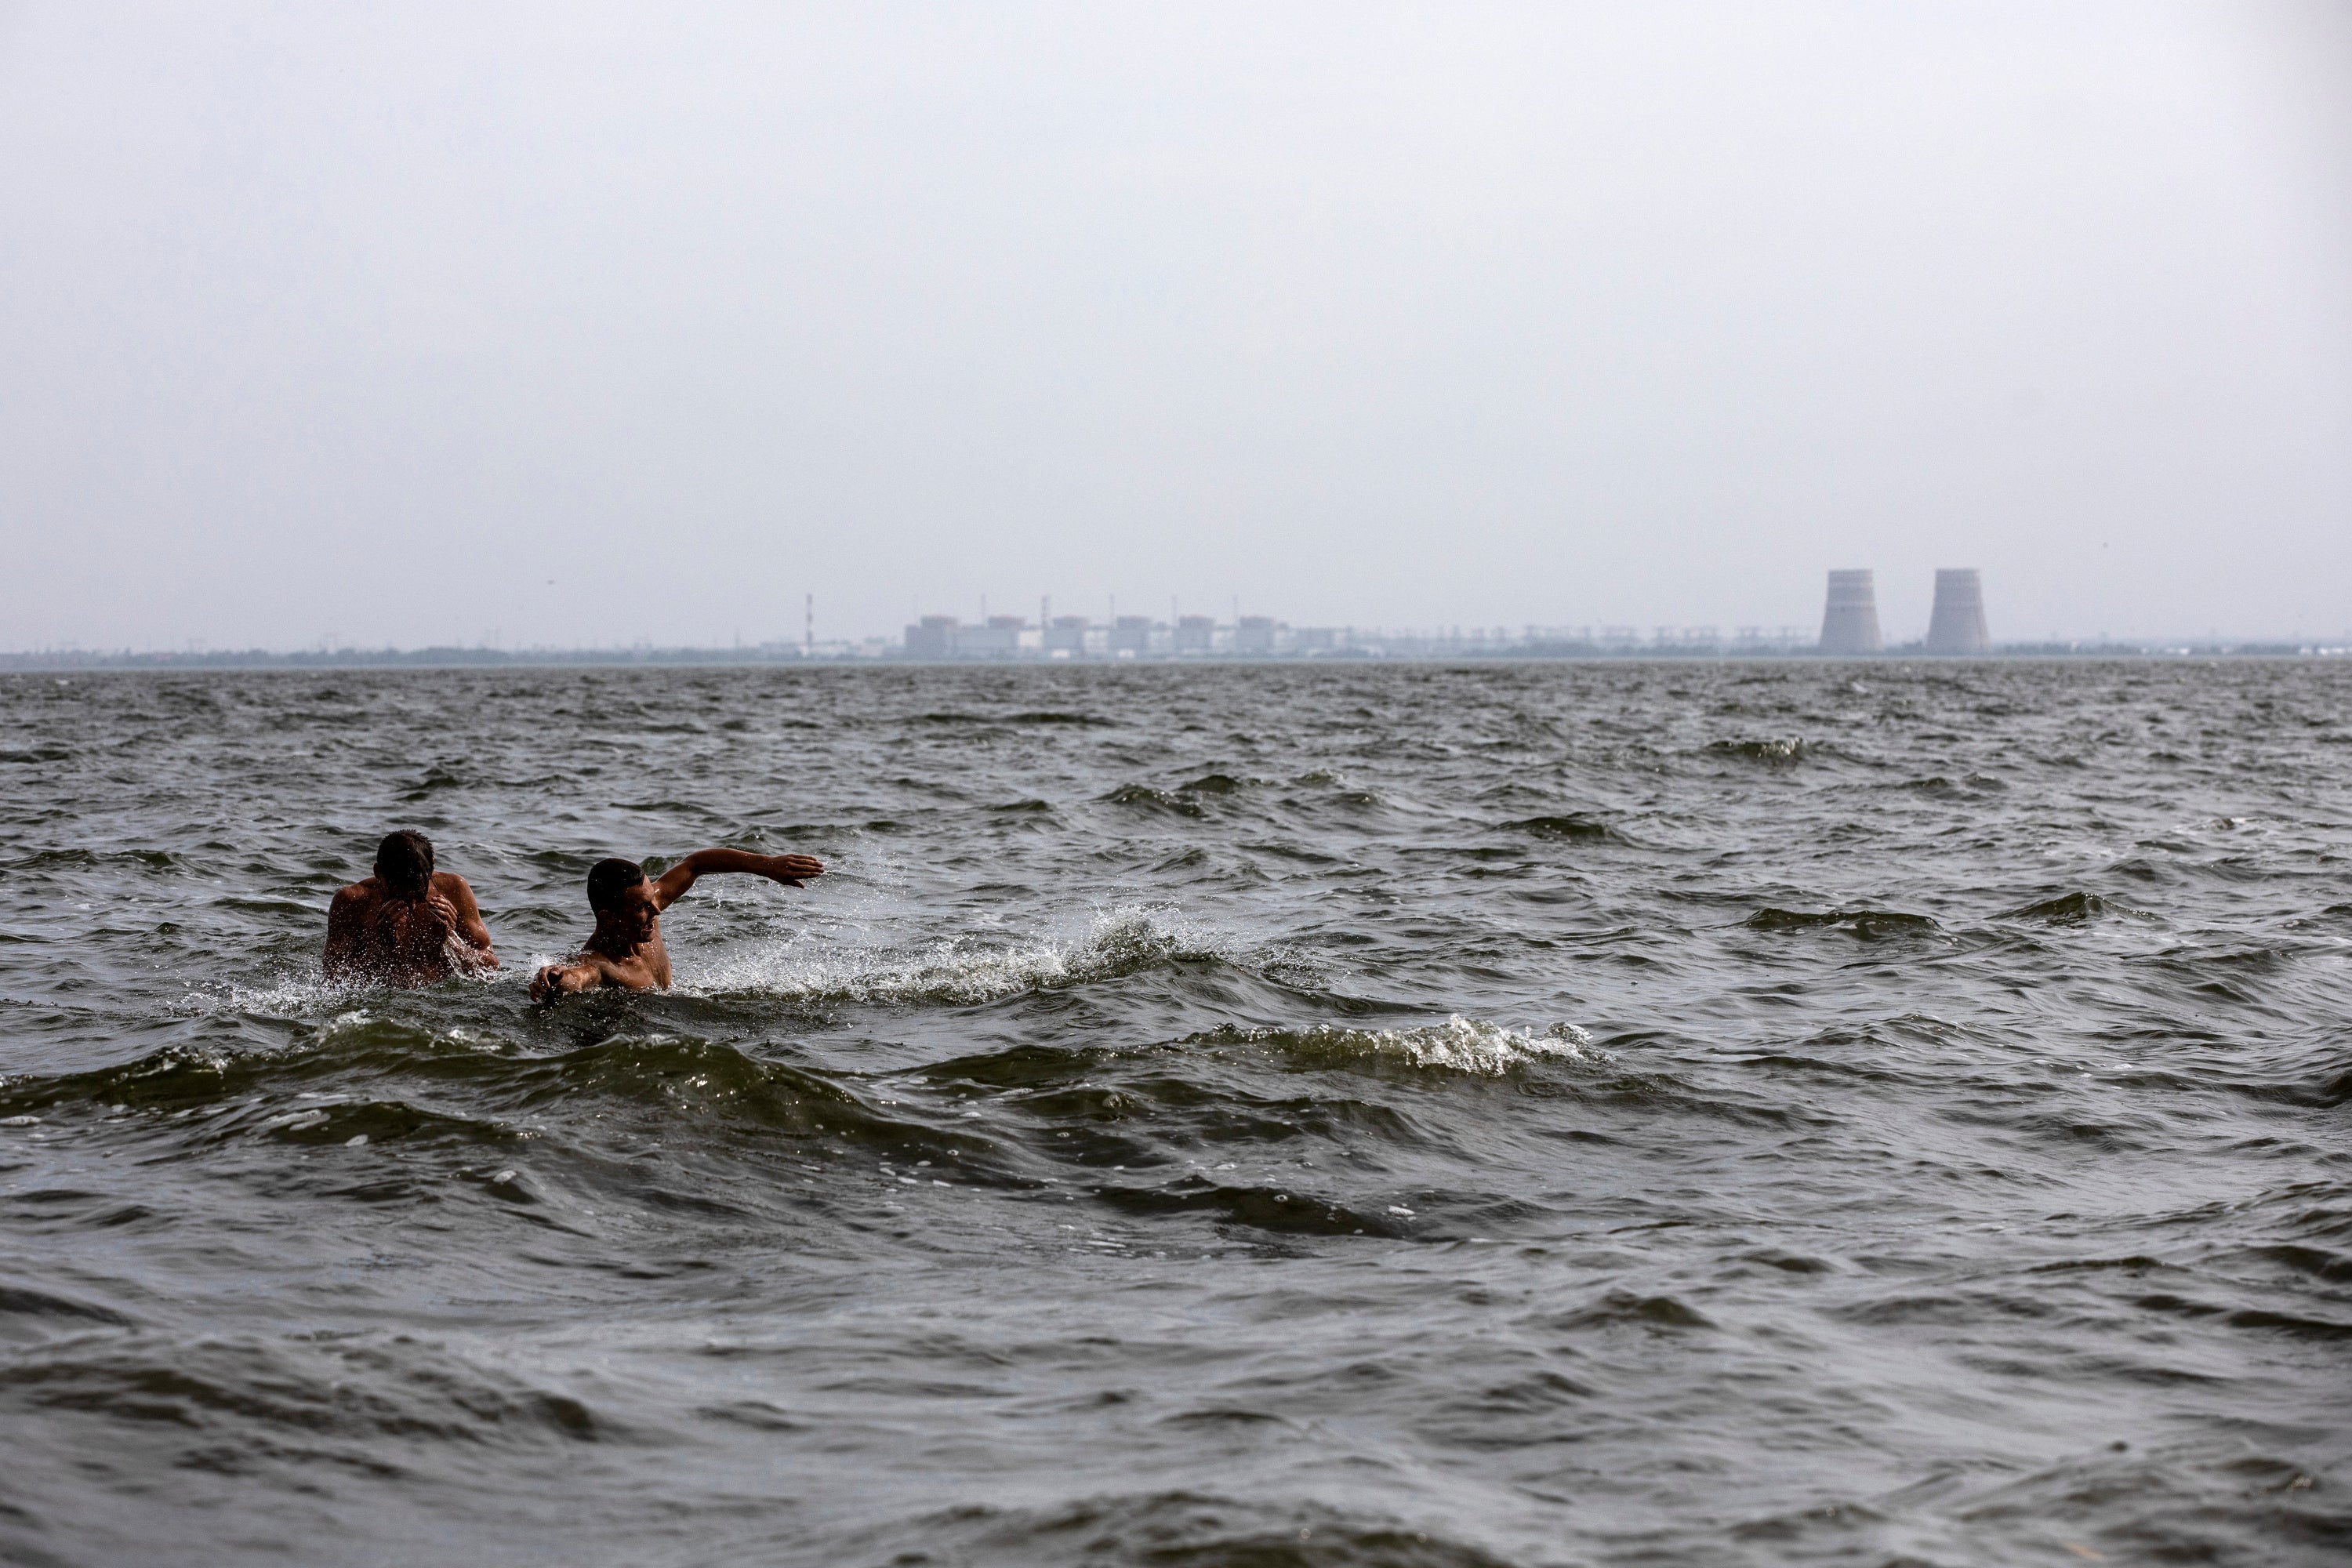 Men swim in Ukraine's Dnieper River, across from the Zaporizhzhia nuclear complex, which is under the control of Russian forces